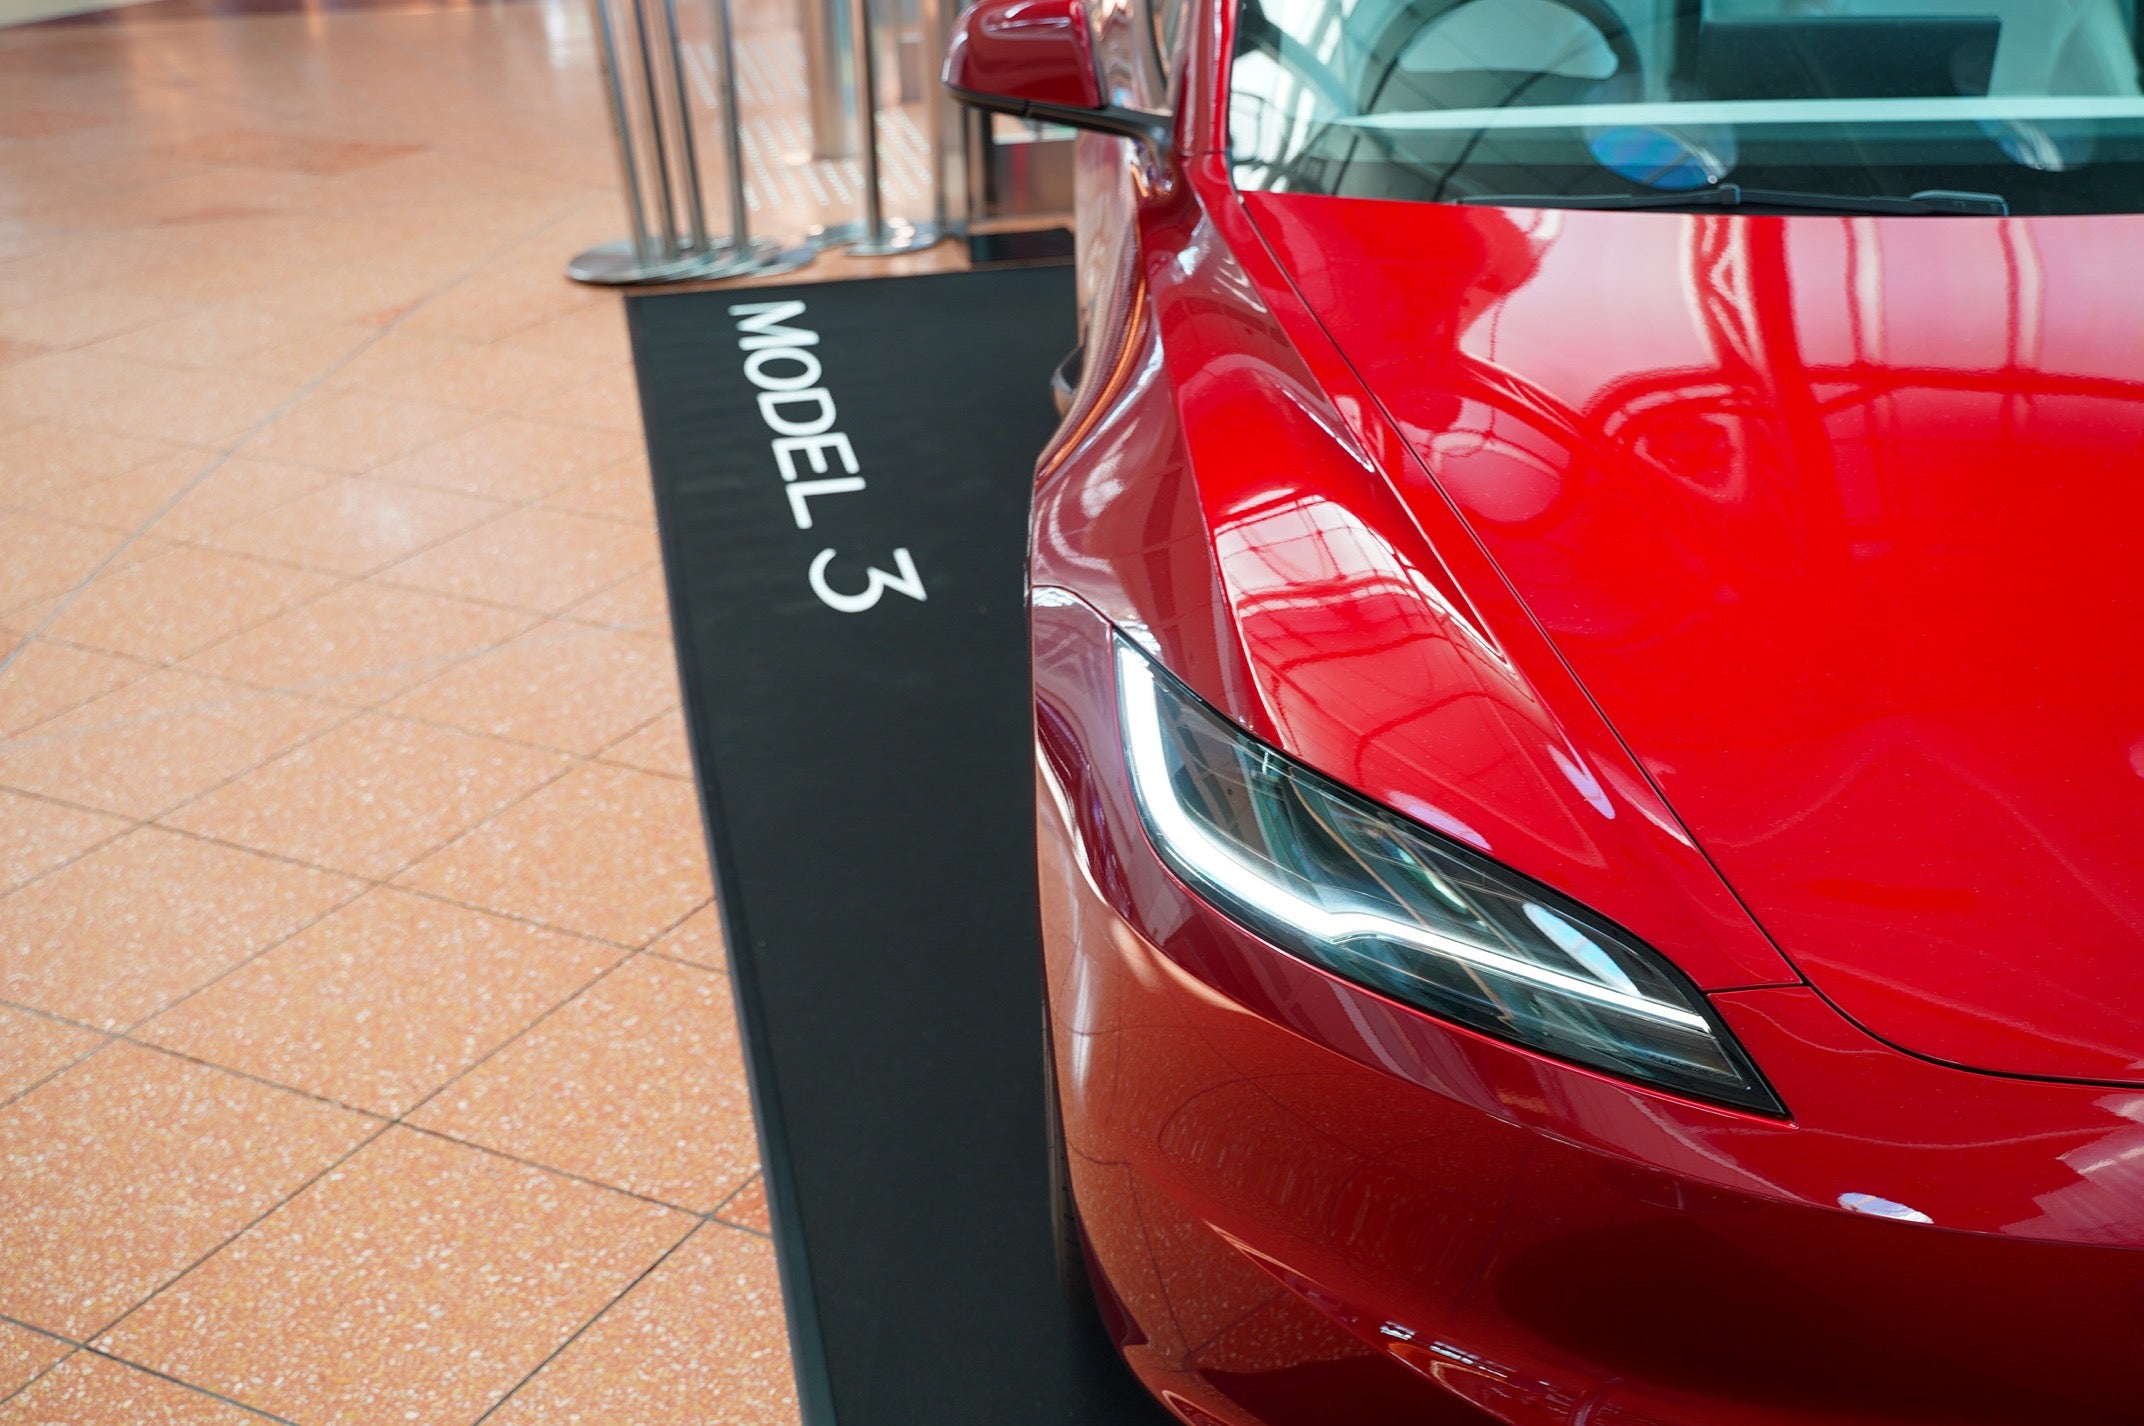 In Q1, Tesla amassed batteries from LG Energy Solution, as per reports